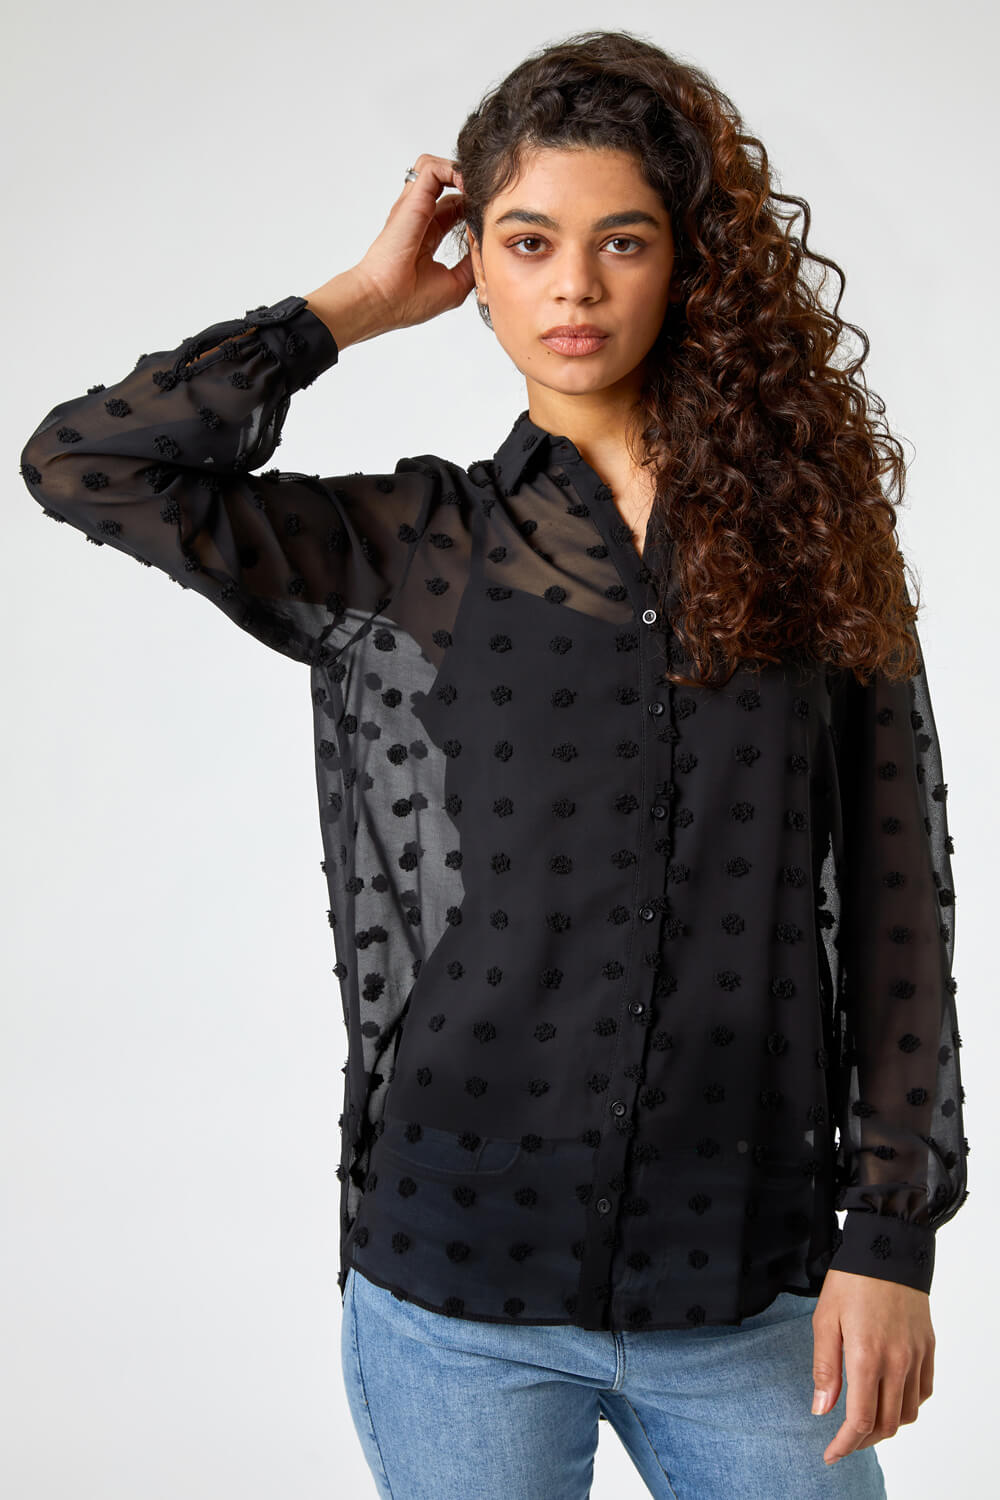 Black Textured Spot Button Up Blouse, Image 5 of 5